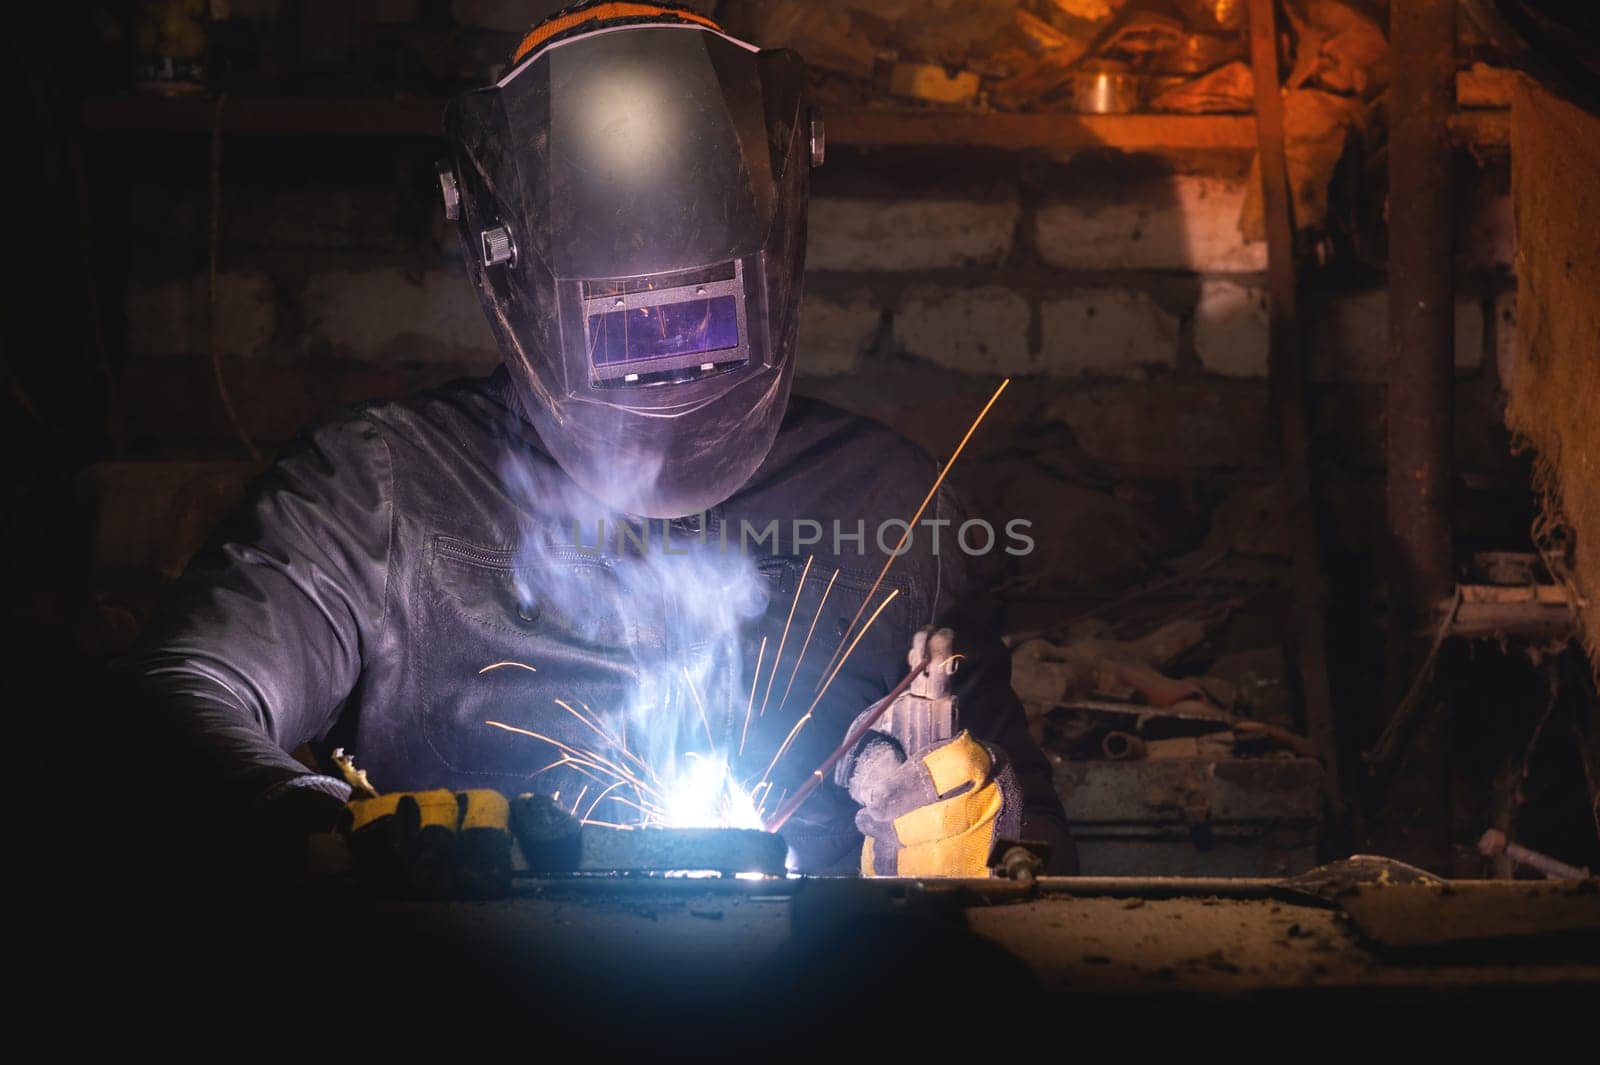 Village workshop, welding in an old garage. An unrecognizable man repairs a metal part wearing protective gloves and a mask by yanik88